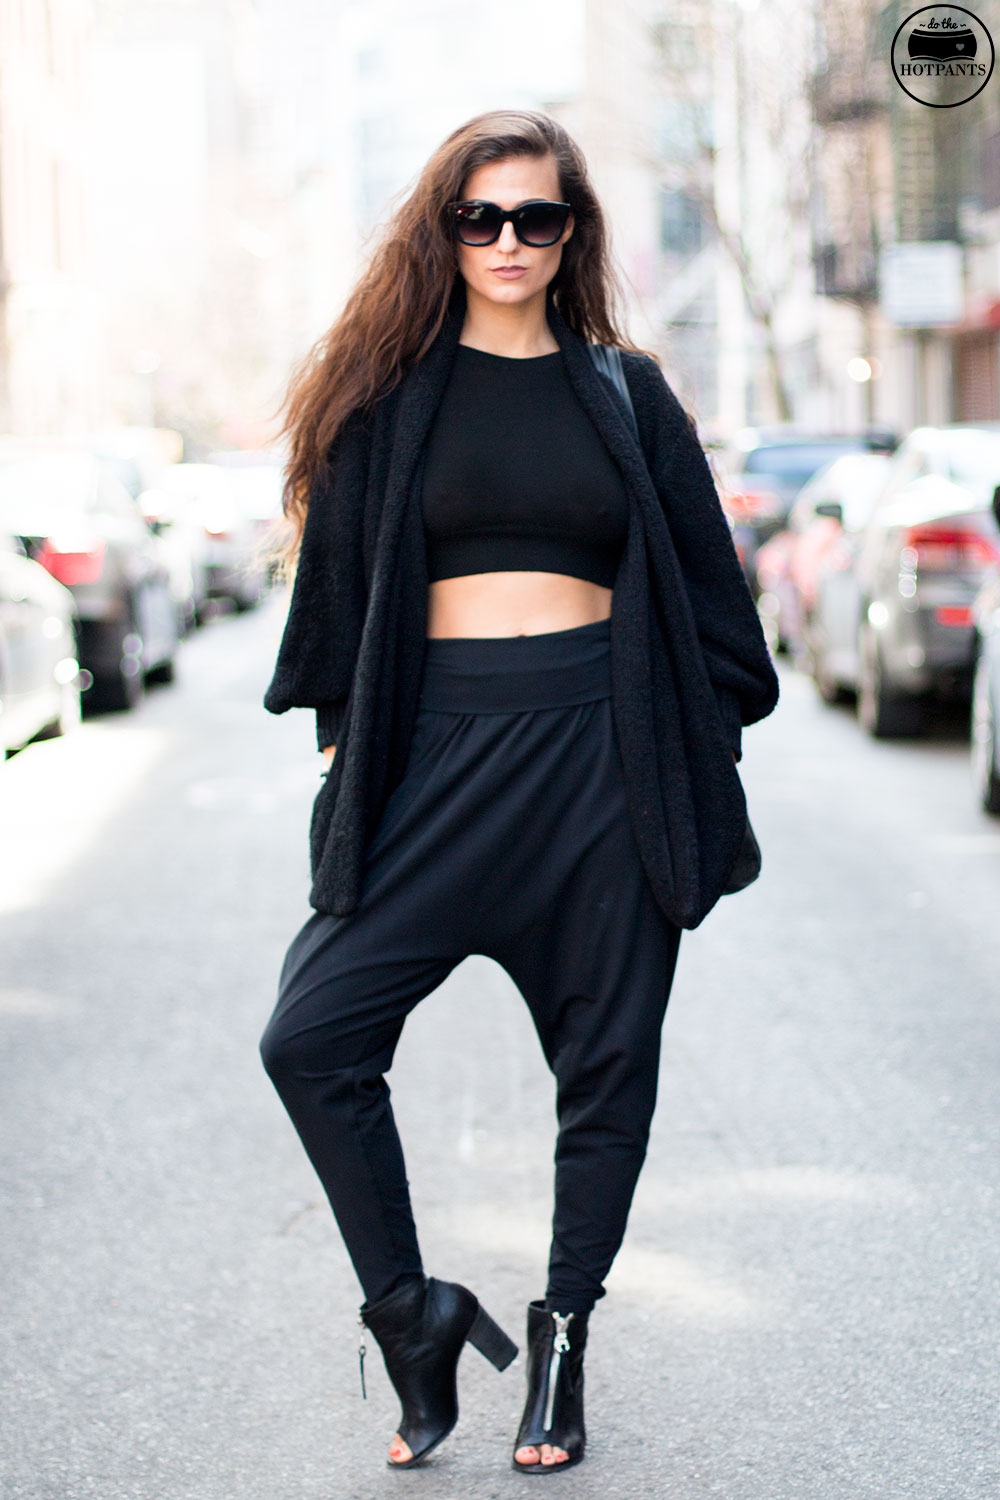 Do The Hotpants Dana Suchow Black Outfit Goth Curvy Woman Midriff Crop Top Harem Pants IMG_6147